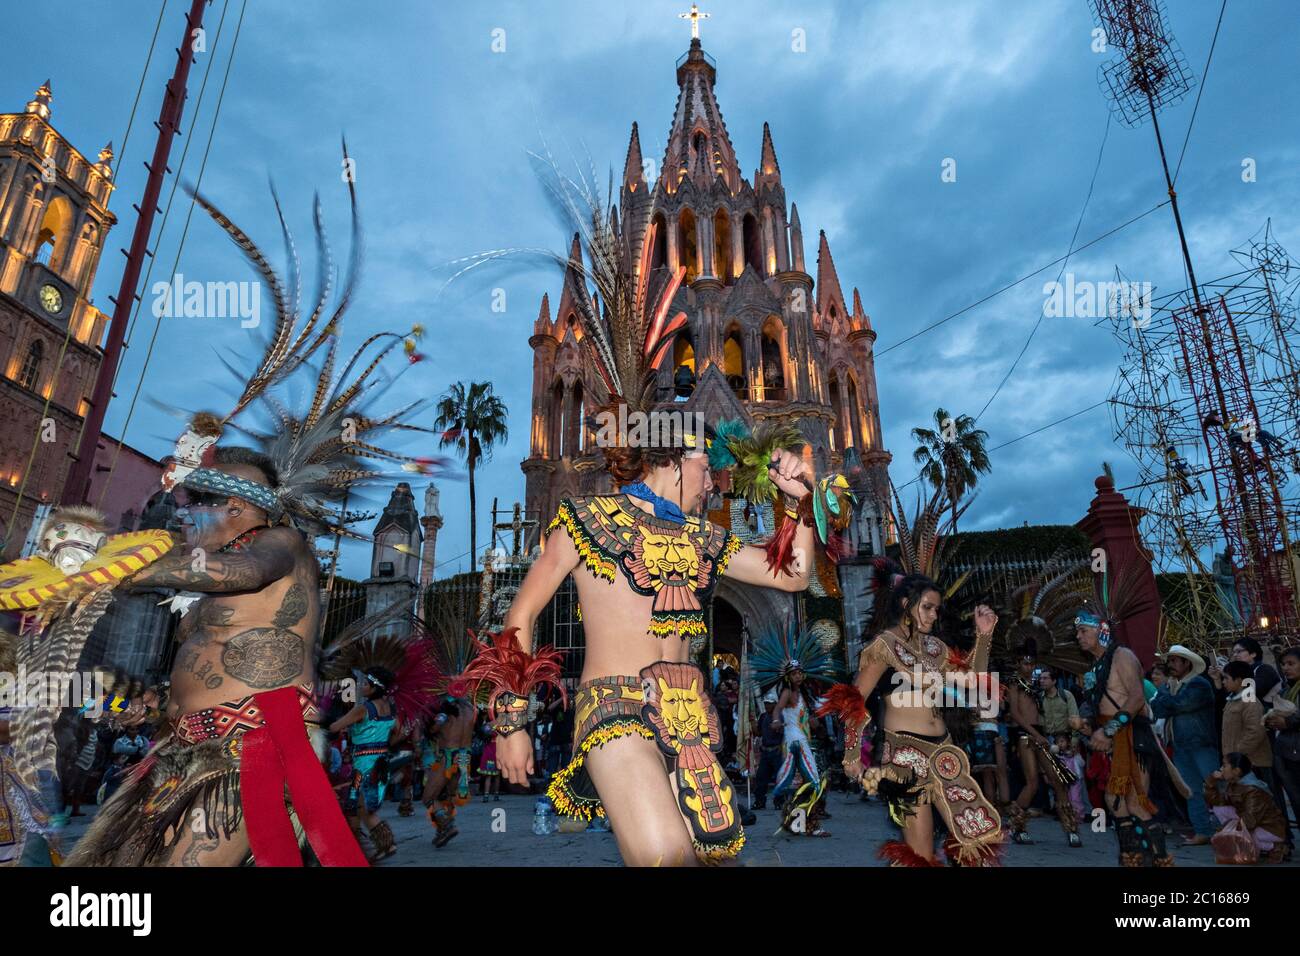 Mexican Concheros dance in a ceremony outside the Parroquia Church of Michael the Archangel during the week long fiesta of the patron saint Saint Michael October 1, 2017 in San Miguel de Allende, Mexico. Stock Photo